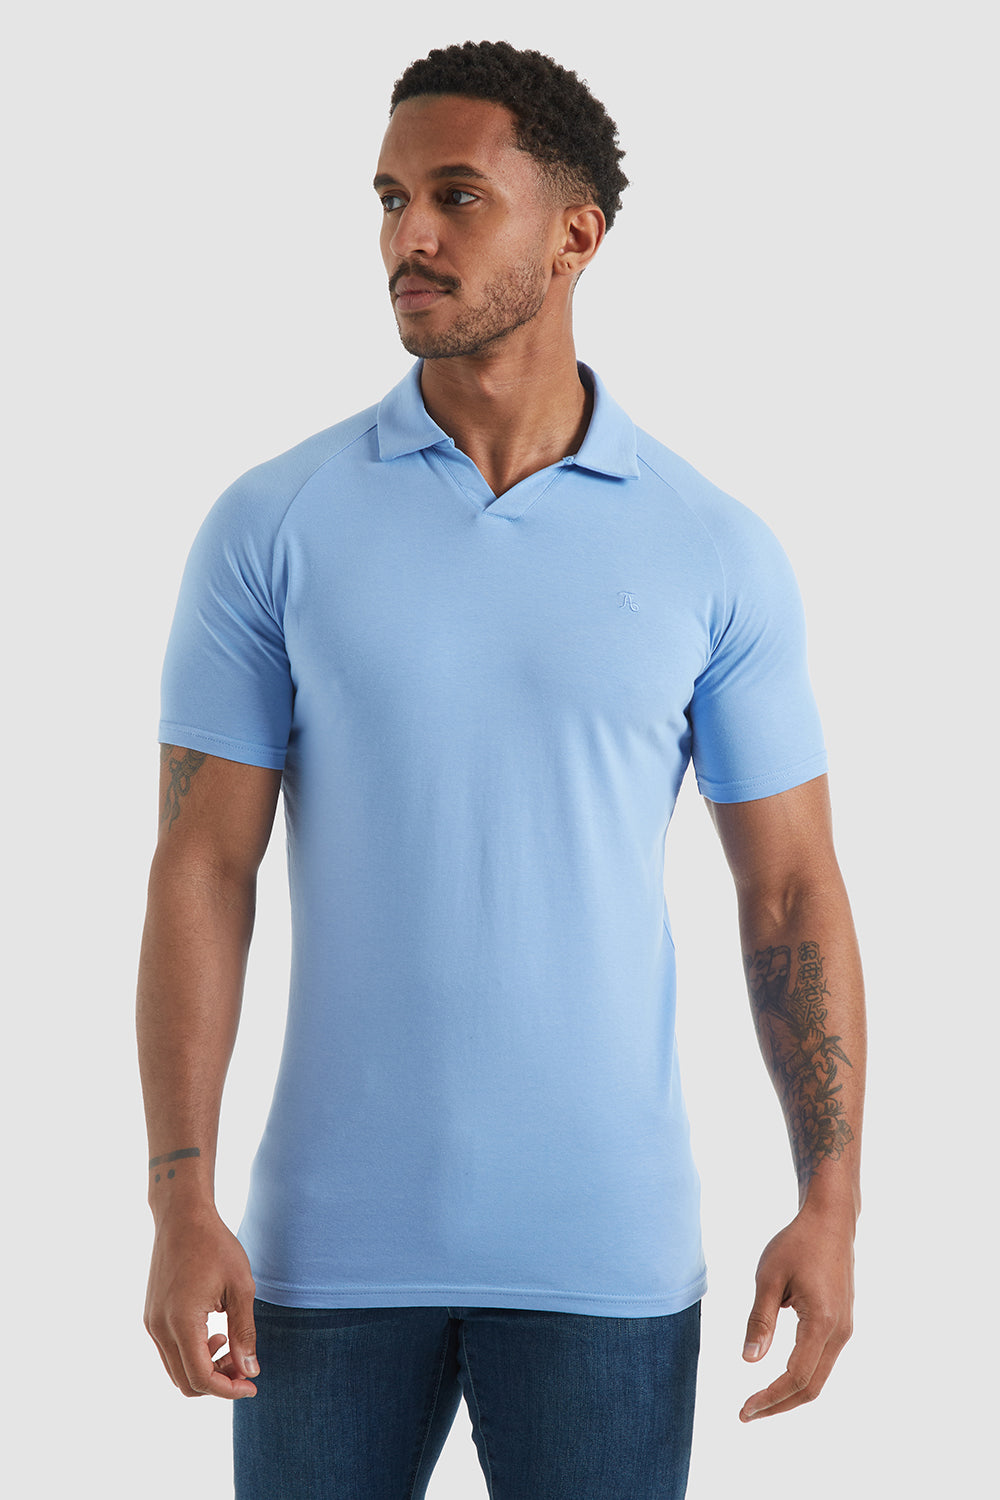 Jersey Buttonless Polo Blue Melange - TAILORED ATHLETE